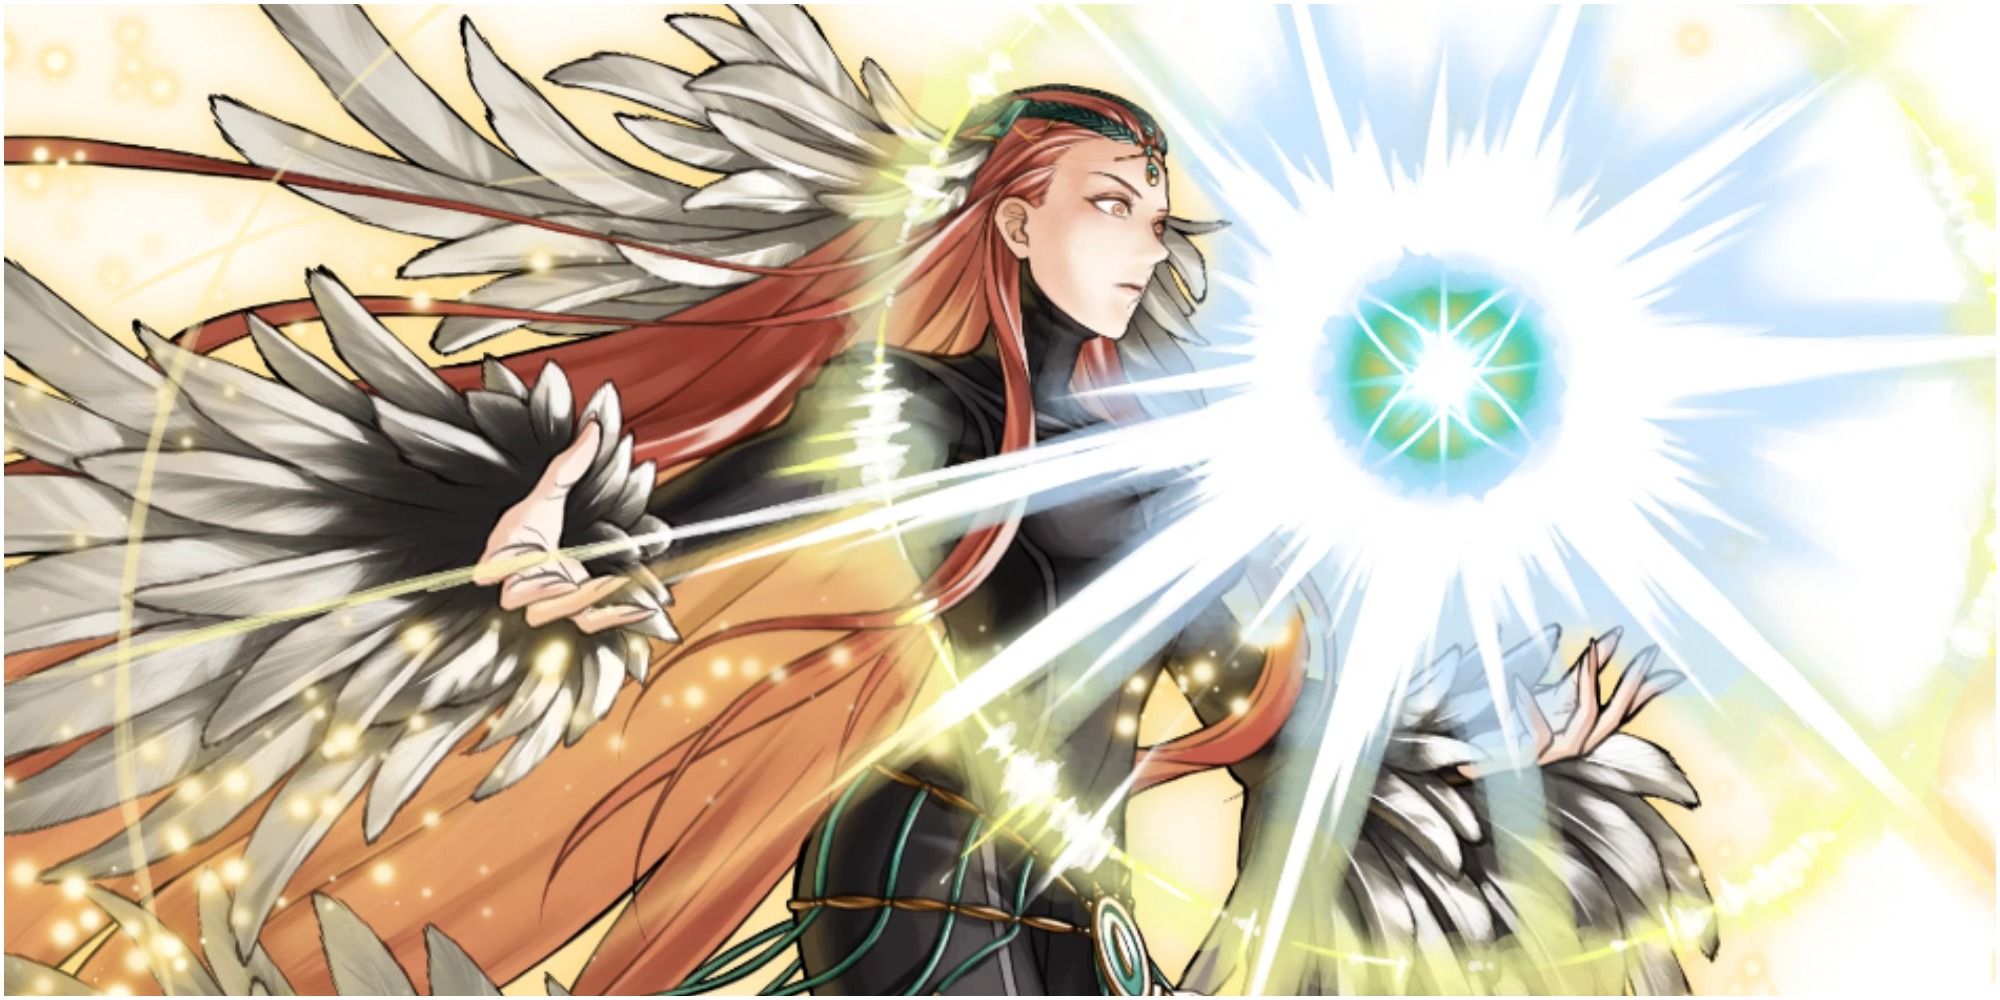 ashera creating an orb of light in fire emblem heroes